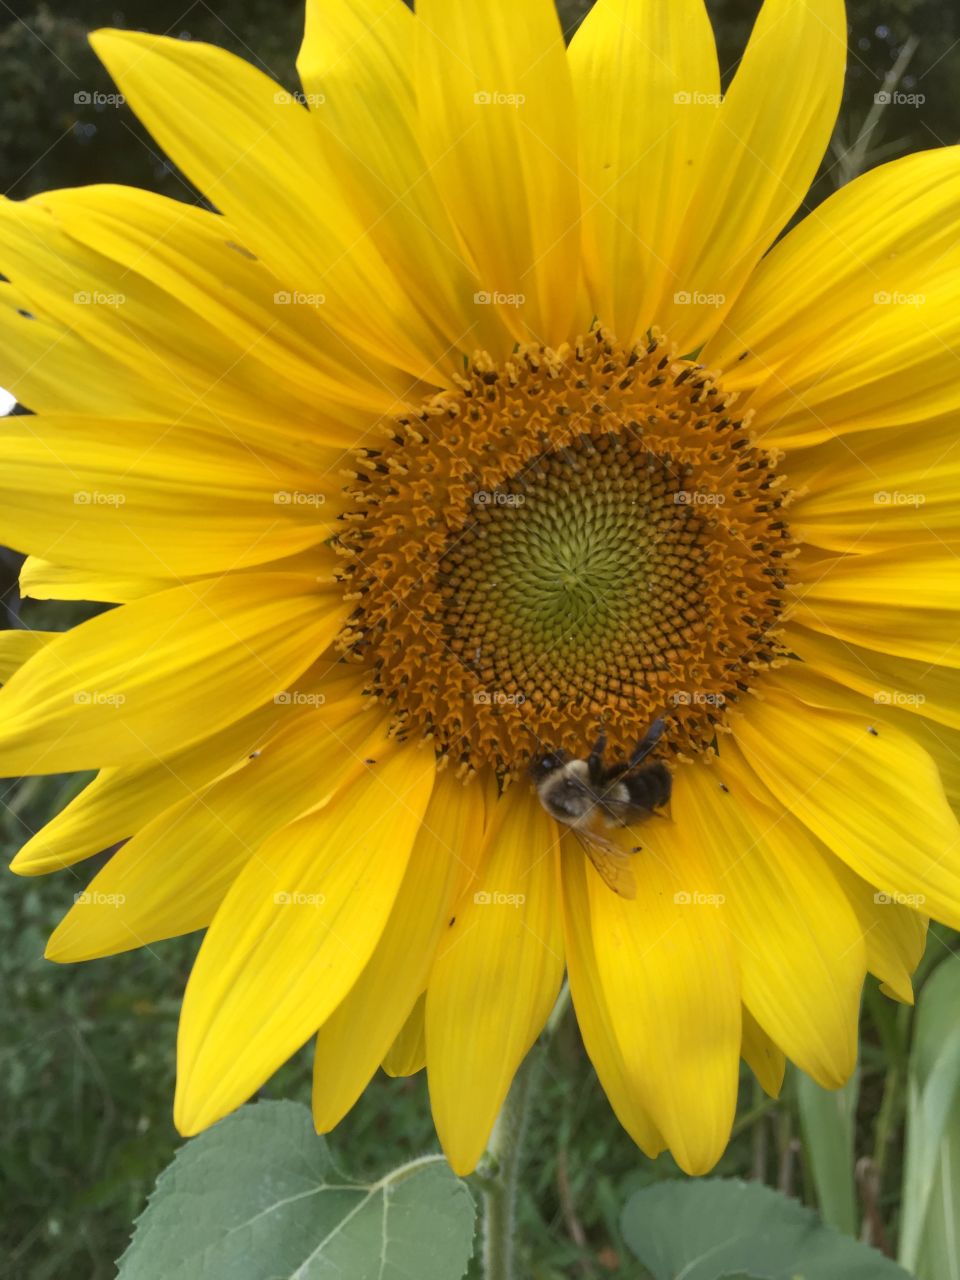 Beeautiful Sunflower. Watching as the bee makes his way around pollinating the sunflower. 